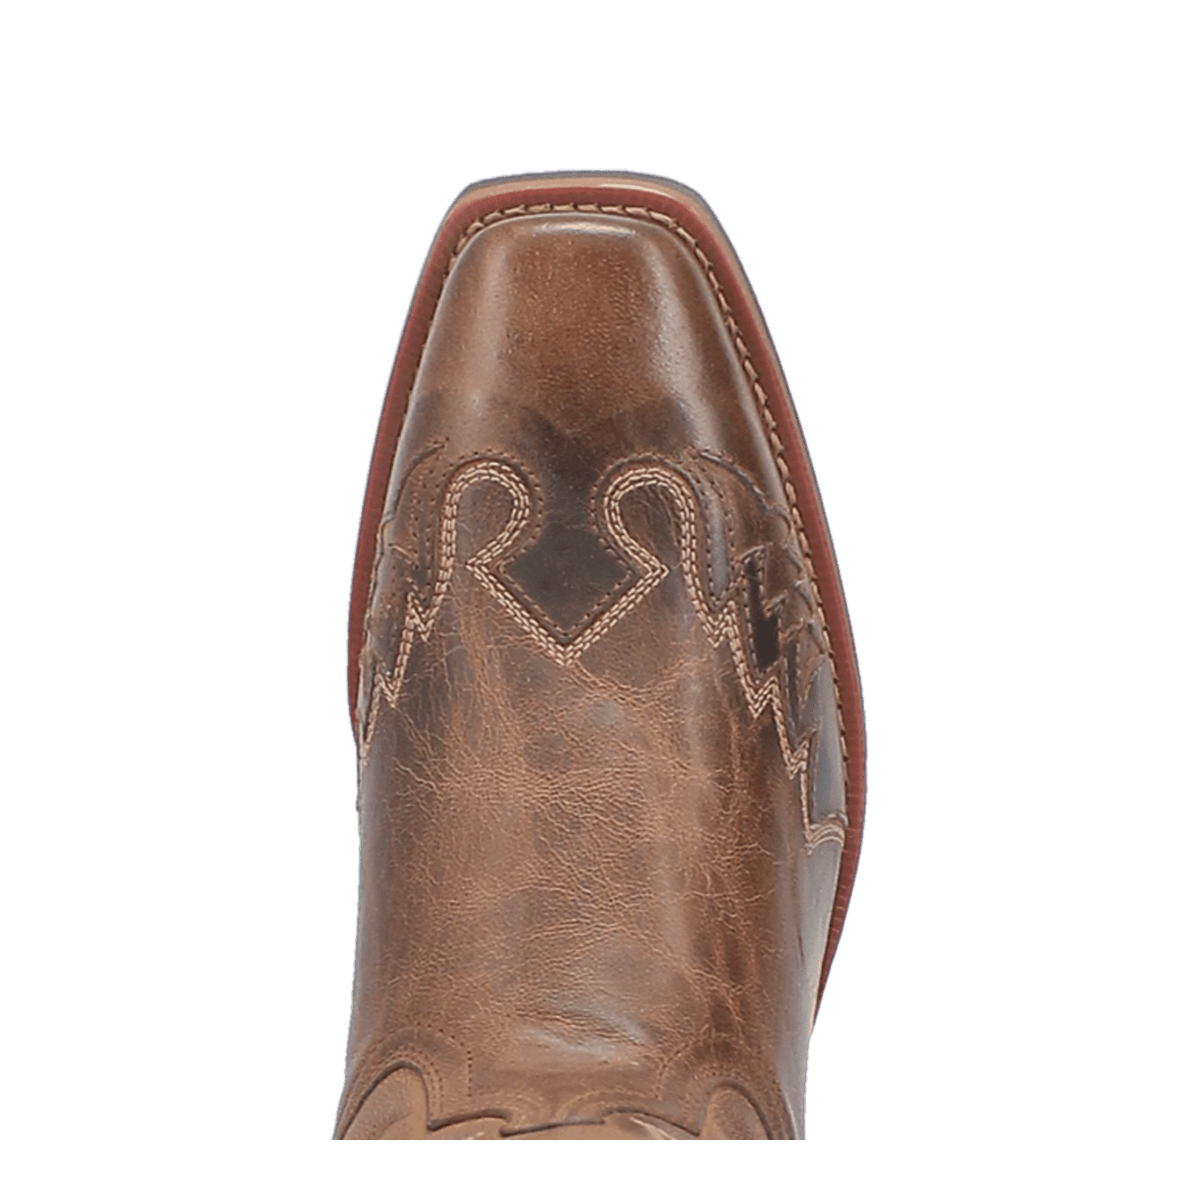 WILLIAMS LEATHER BOOT Image